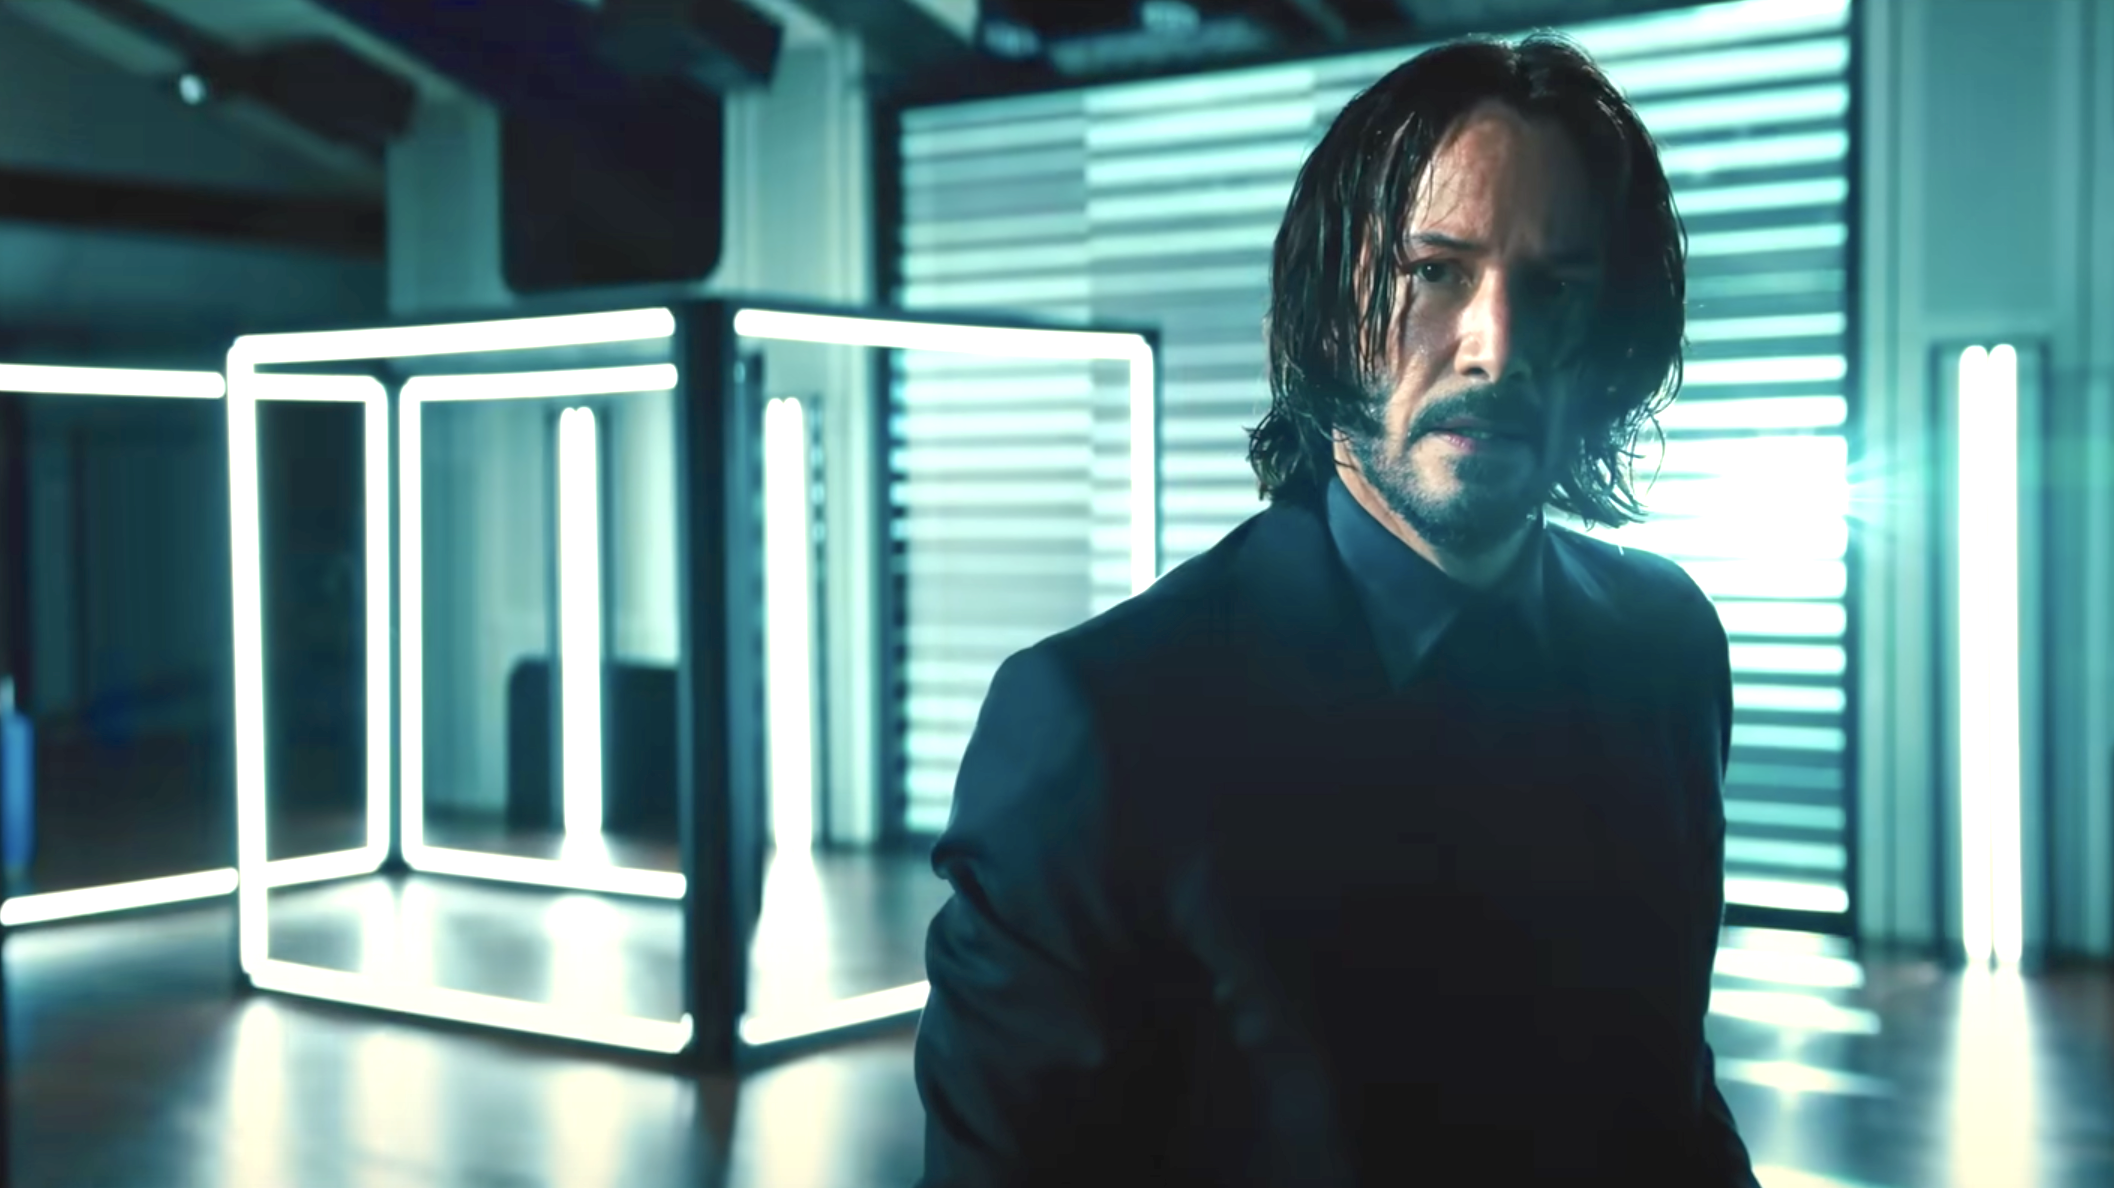 John Wick: Chapter 4: Cast, plot and runtime revealed